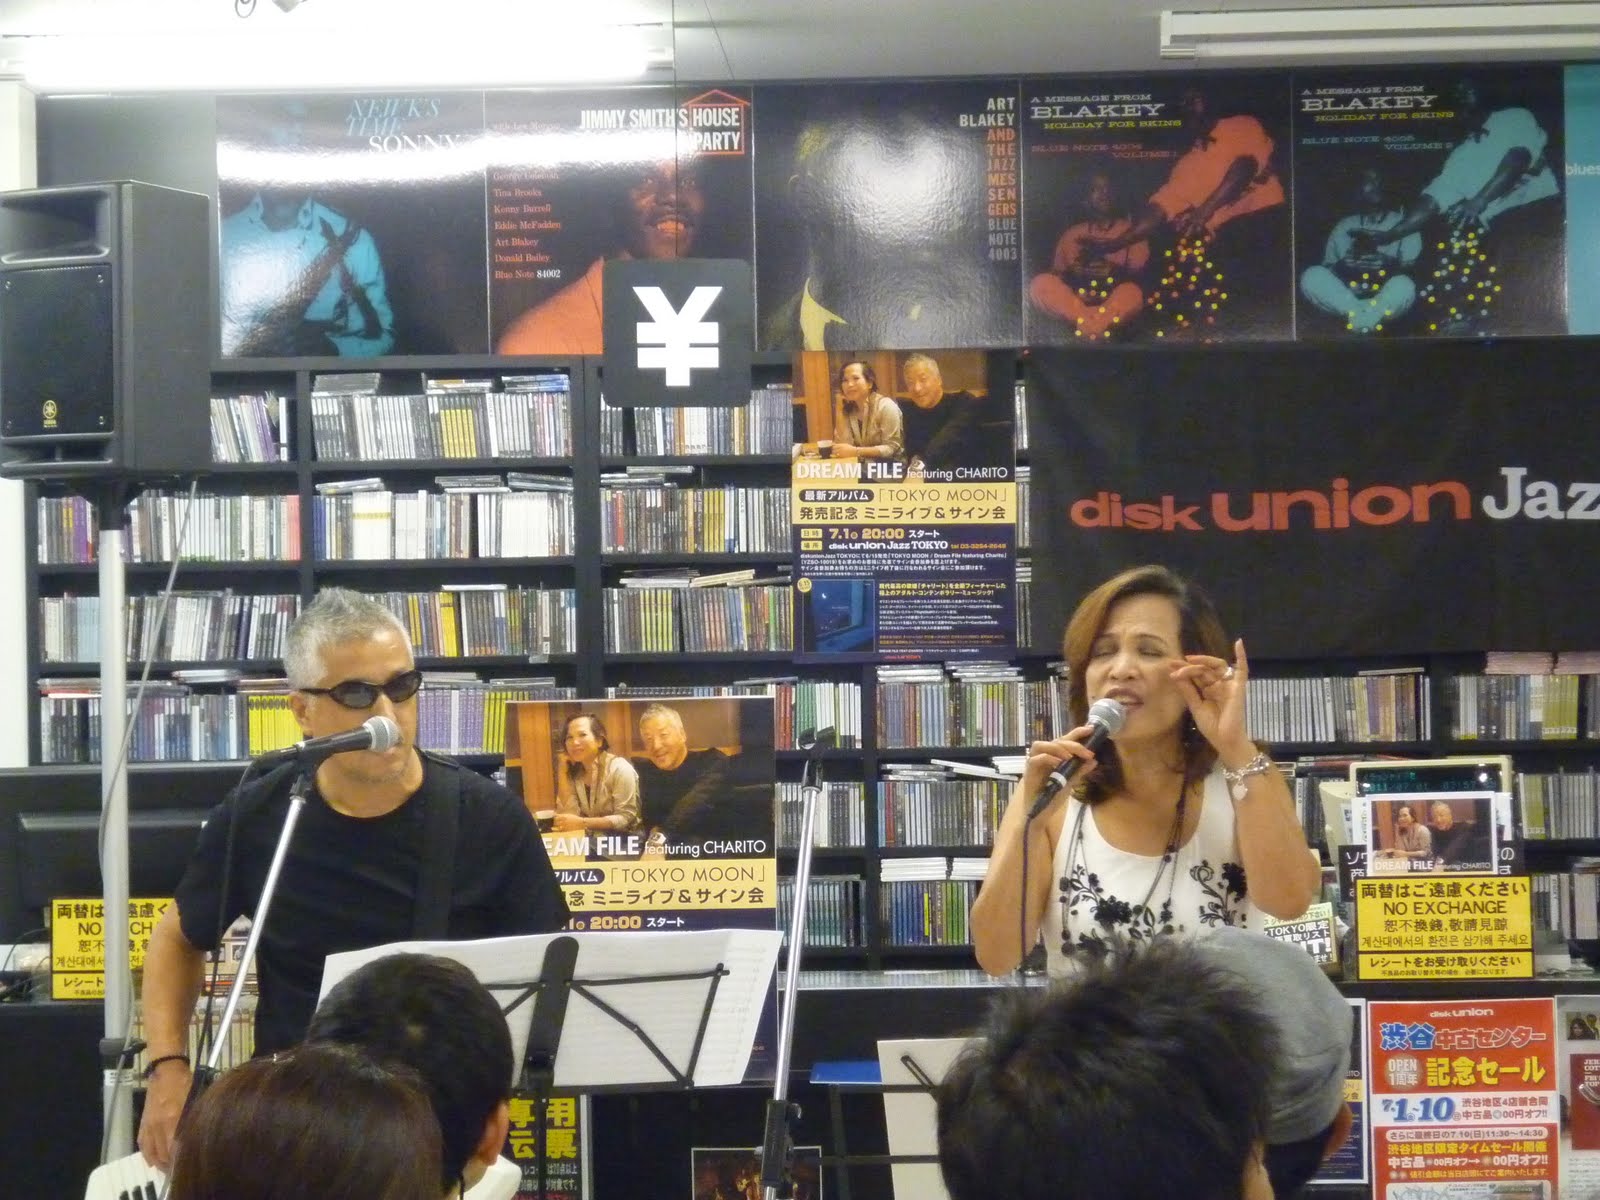 Charito S Music Travels Tokyo Moon In Store Live Cd Signing At Disk Union Jazz Tokyo 7 1 11